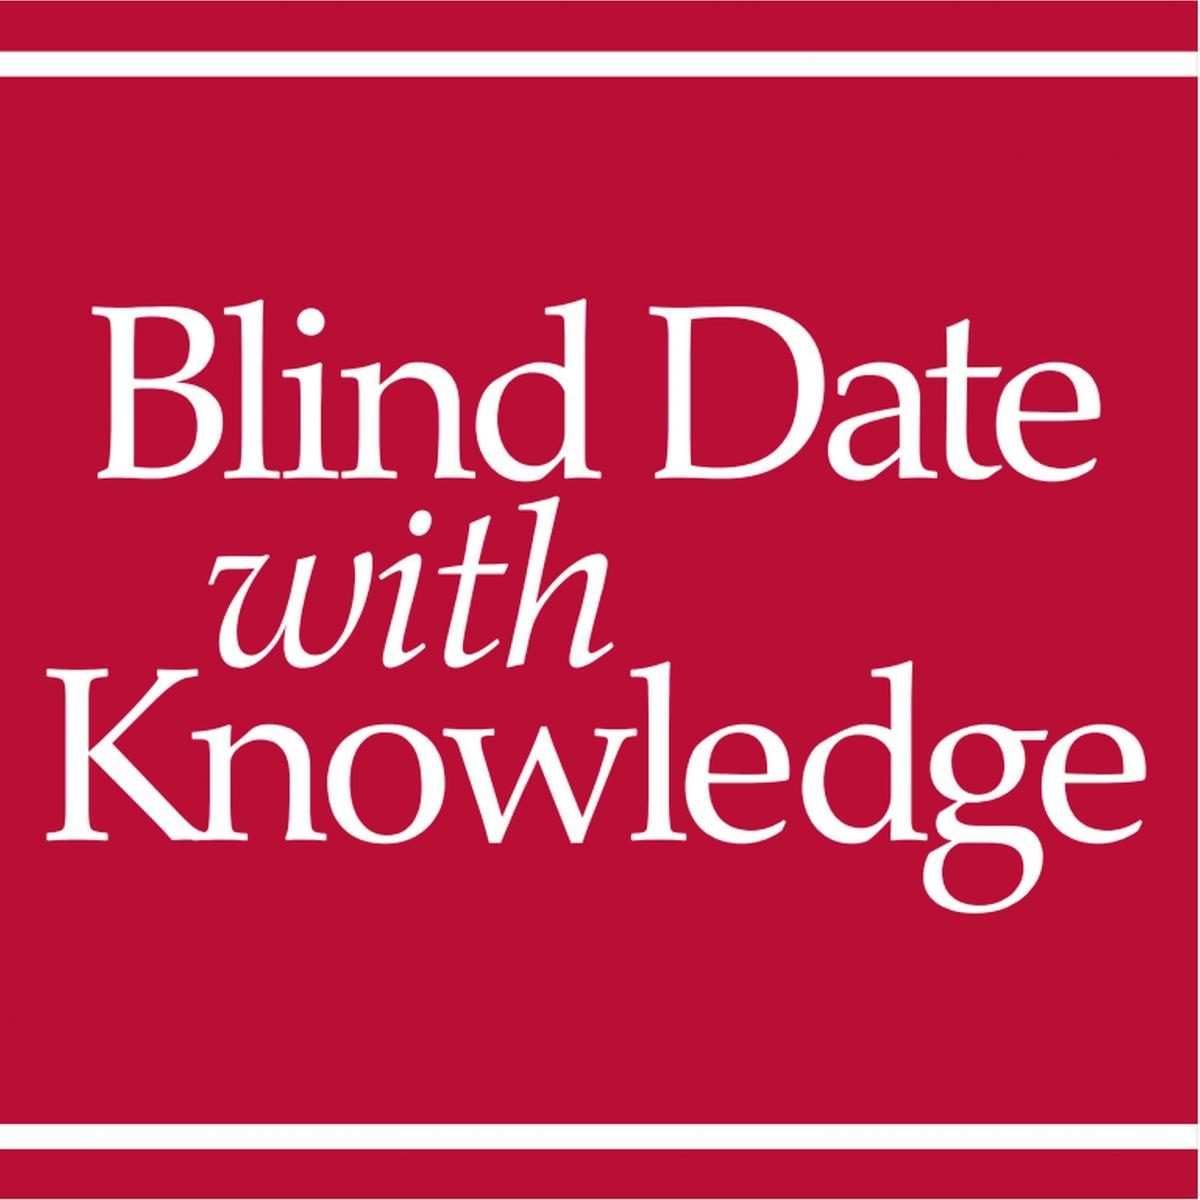 blind date with knowledge wordmark